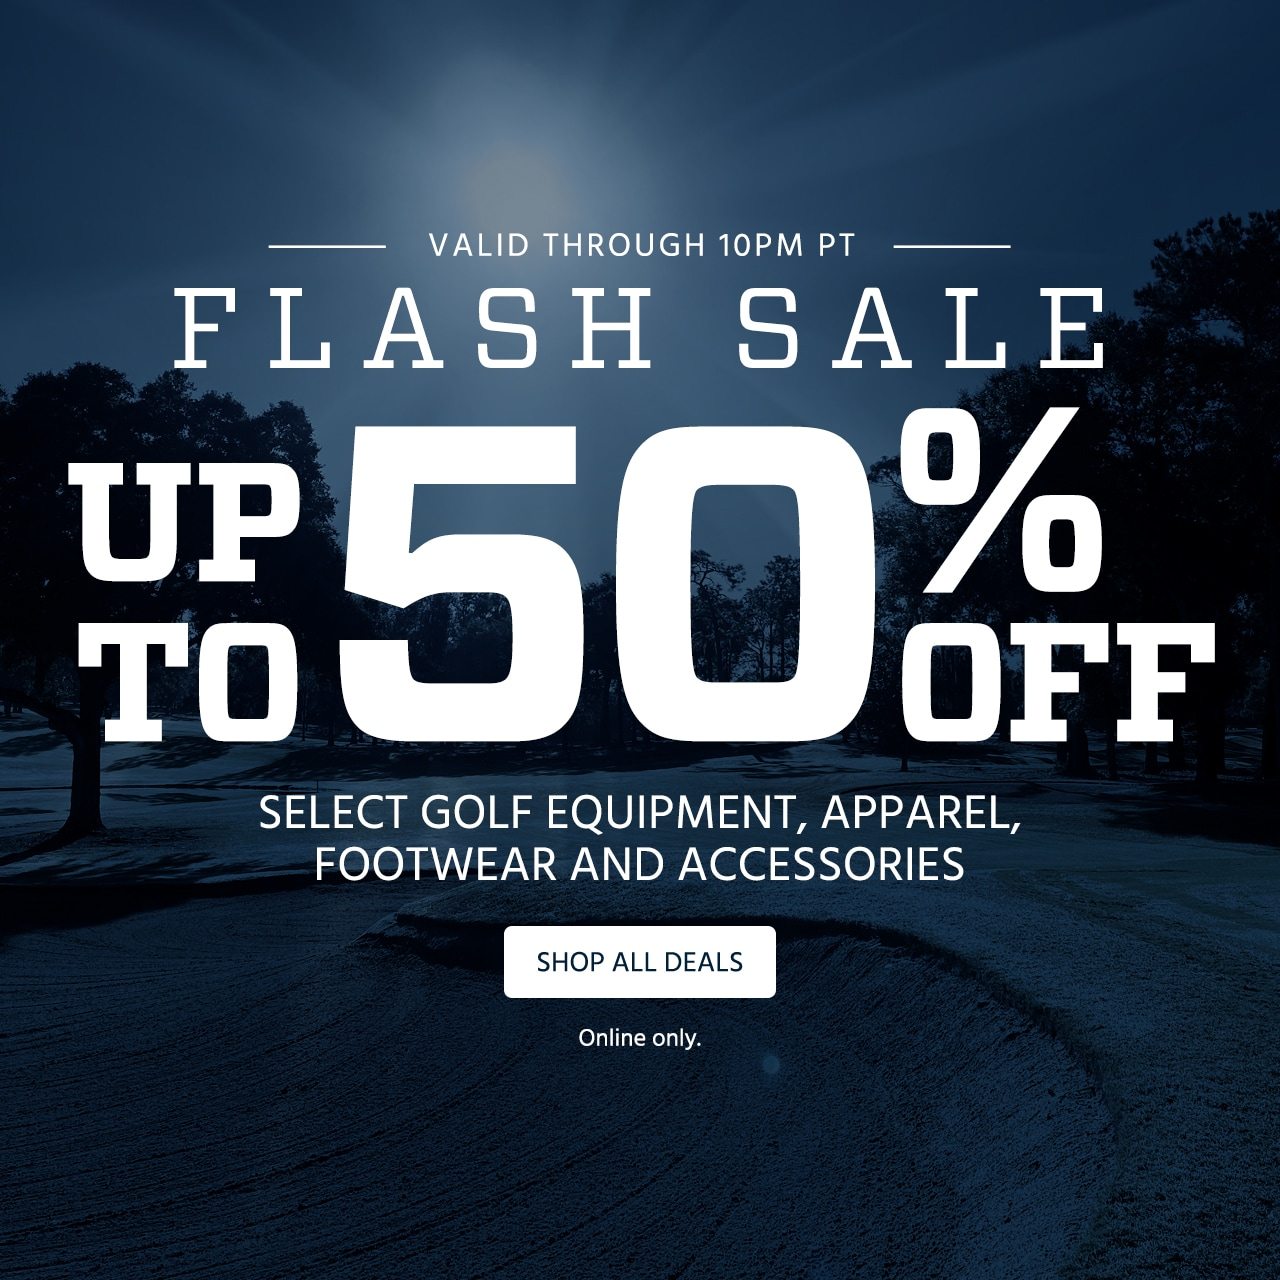 Valid through 10:00 PM PT. Flash Sale. Up to 50% Off Select Golf Equipment, Apparel, Footwear and Accessories. Online only. Shop All Deals.